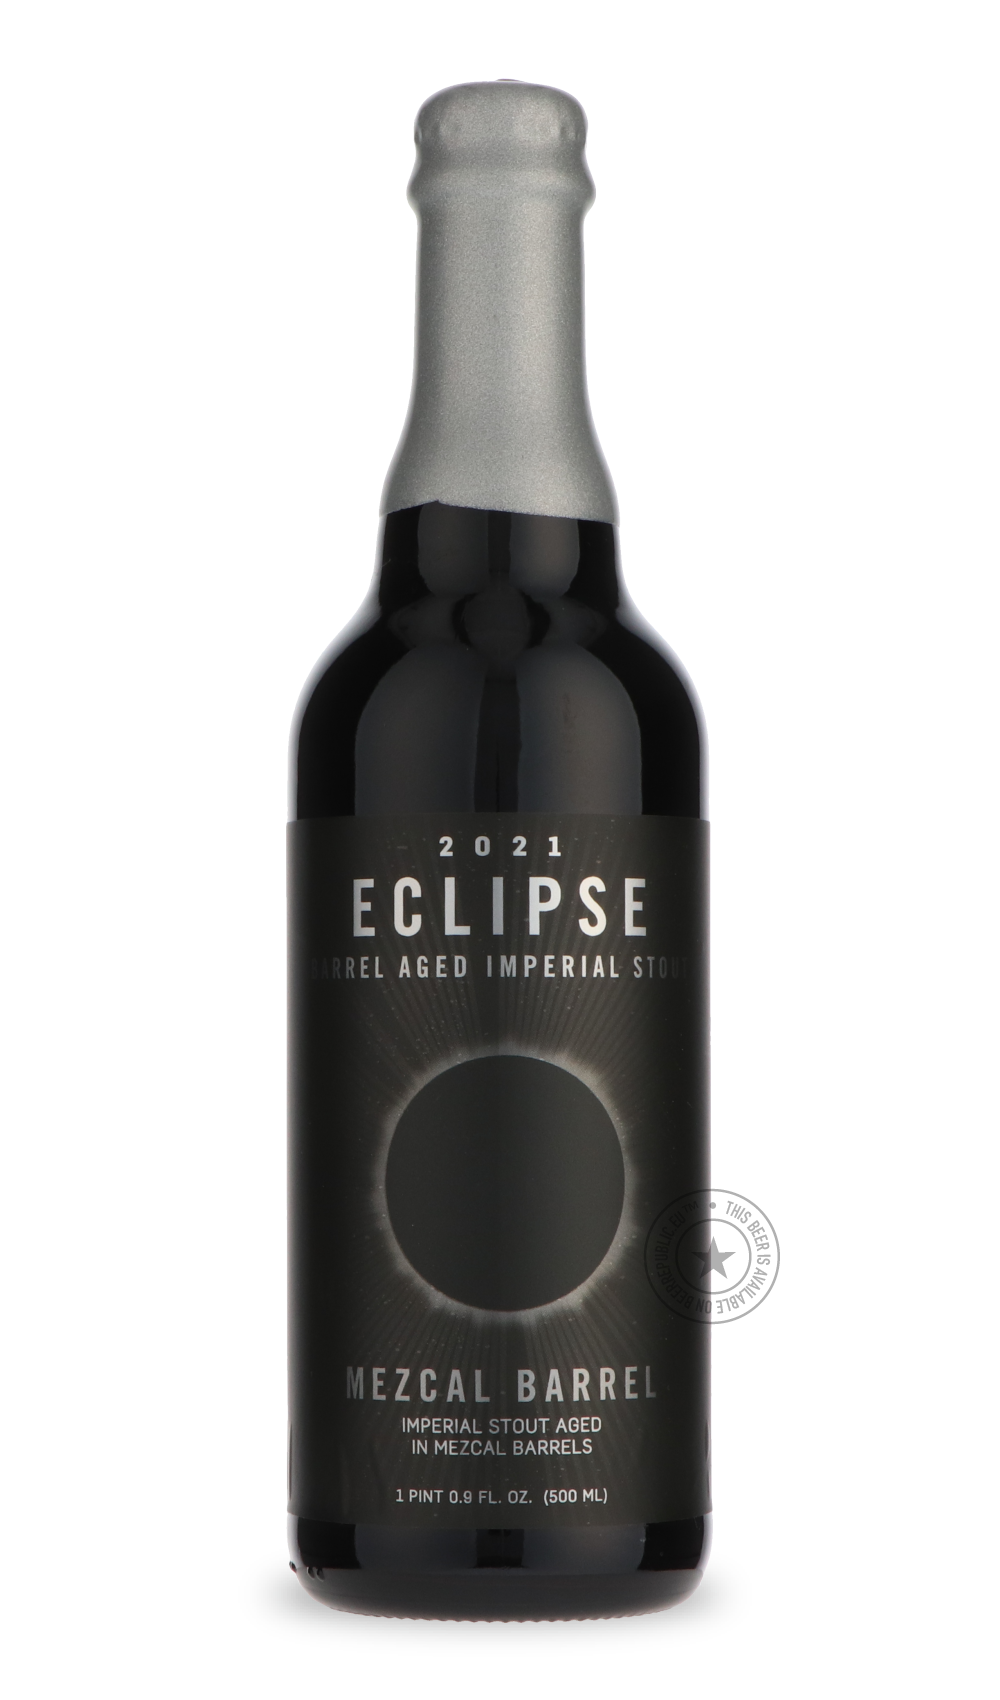 -FiftyFifty- Eclipse Mezcal-Stout & Porter- Only @ Beer Republic - The best online beer store for American & Canadian craft beer - Buy beer online from the USA and Canada - Bier online kopen - Amerikaans bier kopen - Craft beer store - Craft beer kopen - Amerikanisch bier kaufen - Bier online kaufen - Acheter biere online - IPA - Stout - Porter - New England IPA - Hazy IPA - Imperial Stout - Barrel Aged - Barrel Aged Imperial Stout - Brown - Dark beer - Blond - Blonde - Pilsner - Lager - Wheat - Weizen - Am